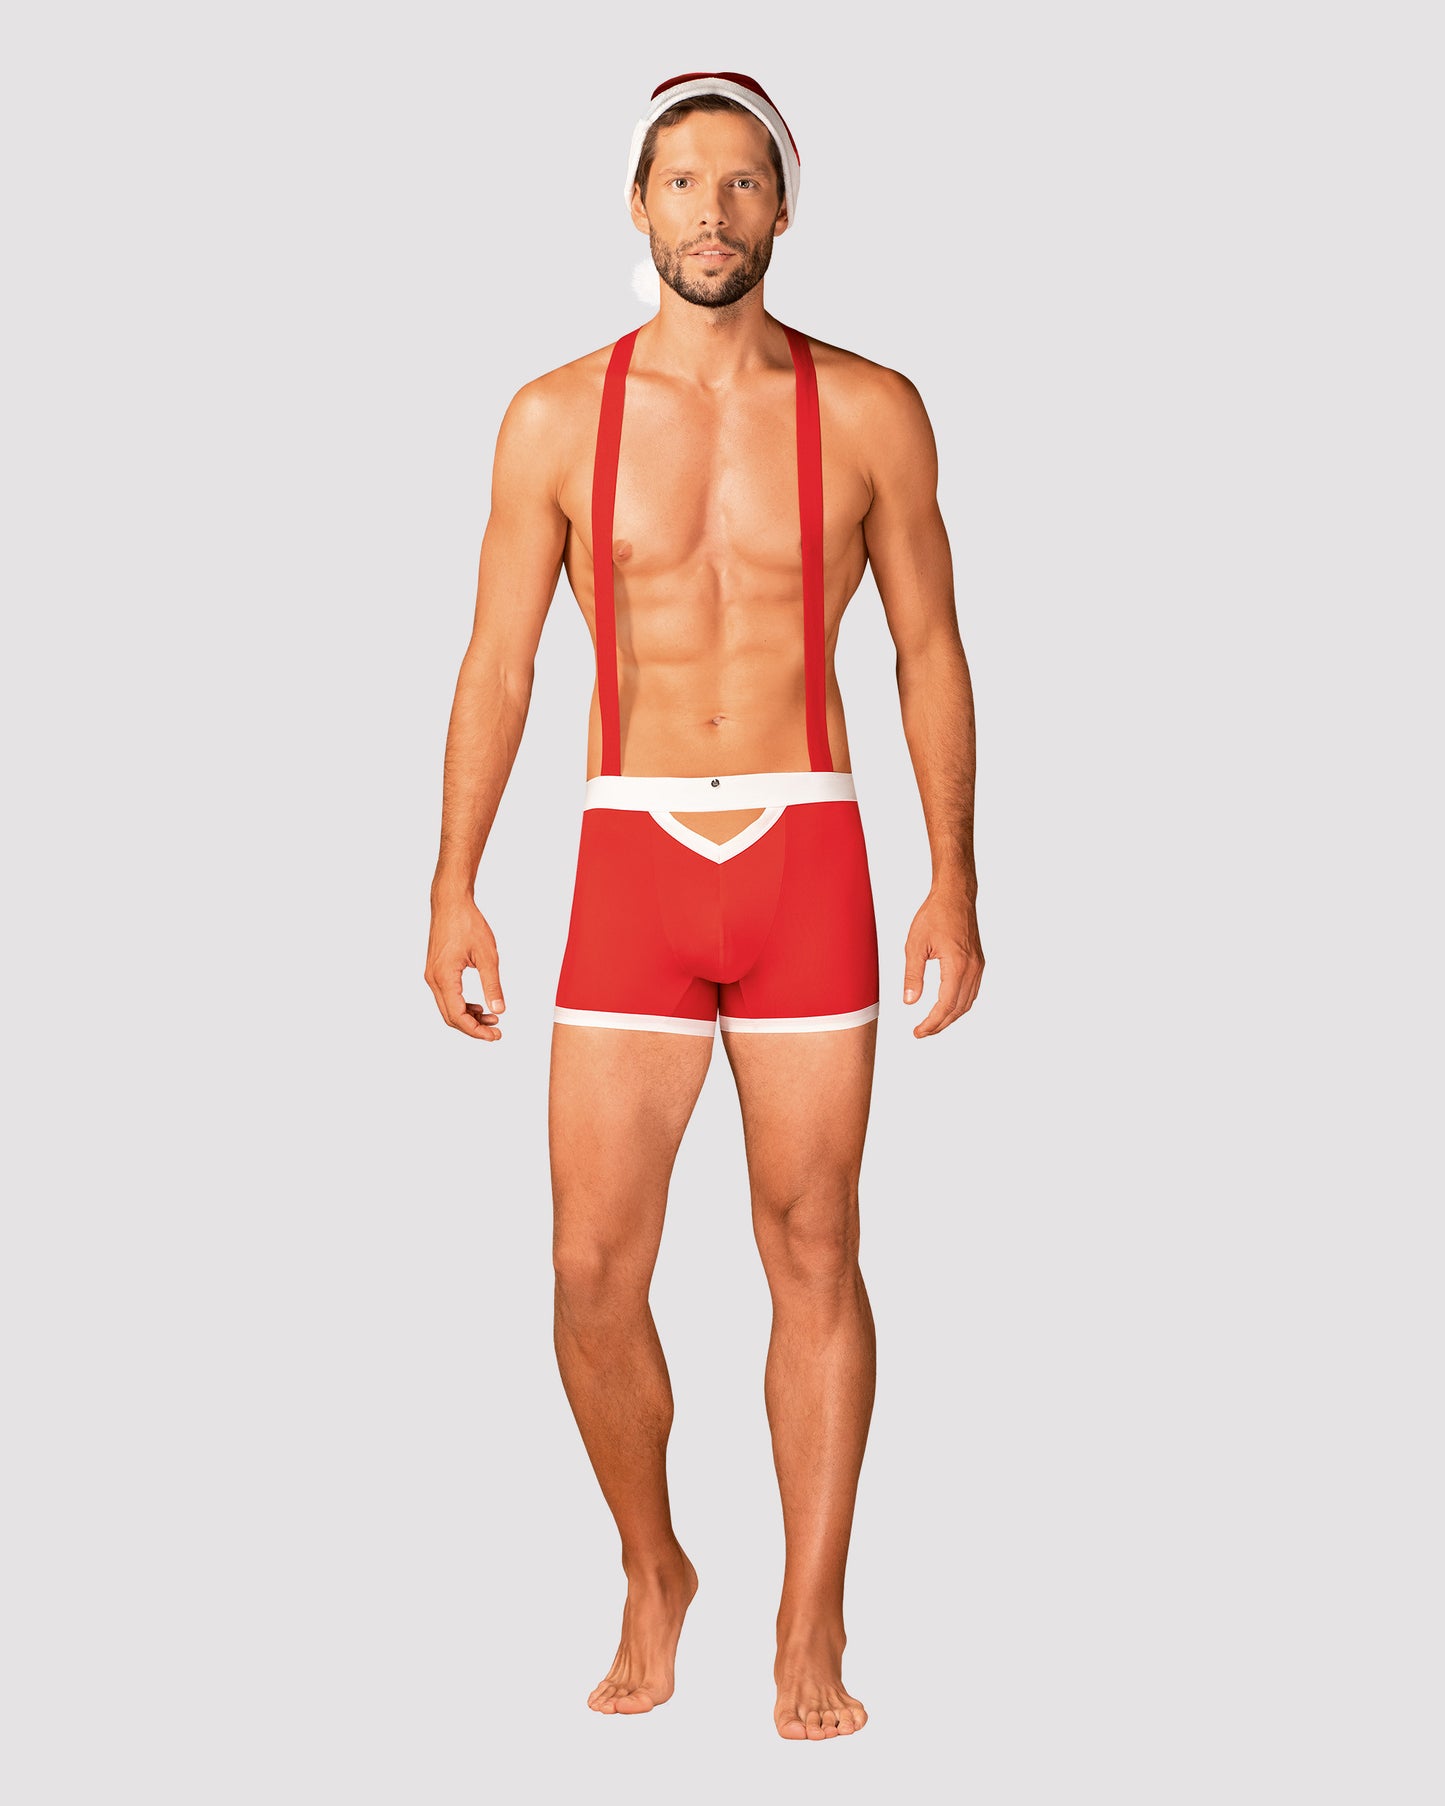 Mr. Claus 3 Pc Set Mens Santa Underwear Christmas Set Duchess and Daisy $86.95 Ho ho ho! A hot men’s Santa outfit is something you need on those long, winter evenings! The sexy boxer shorts 